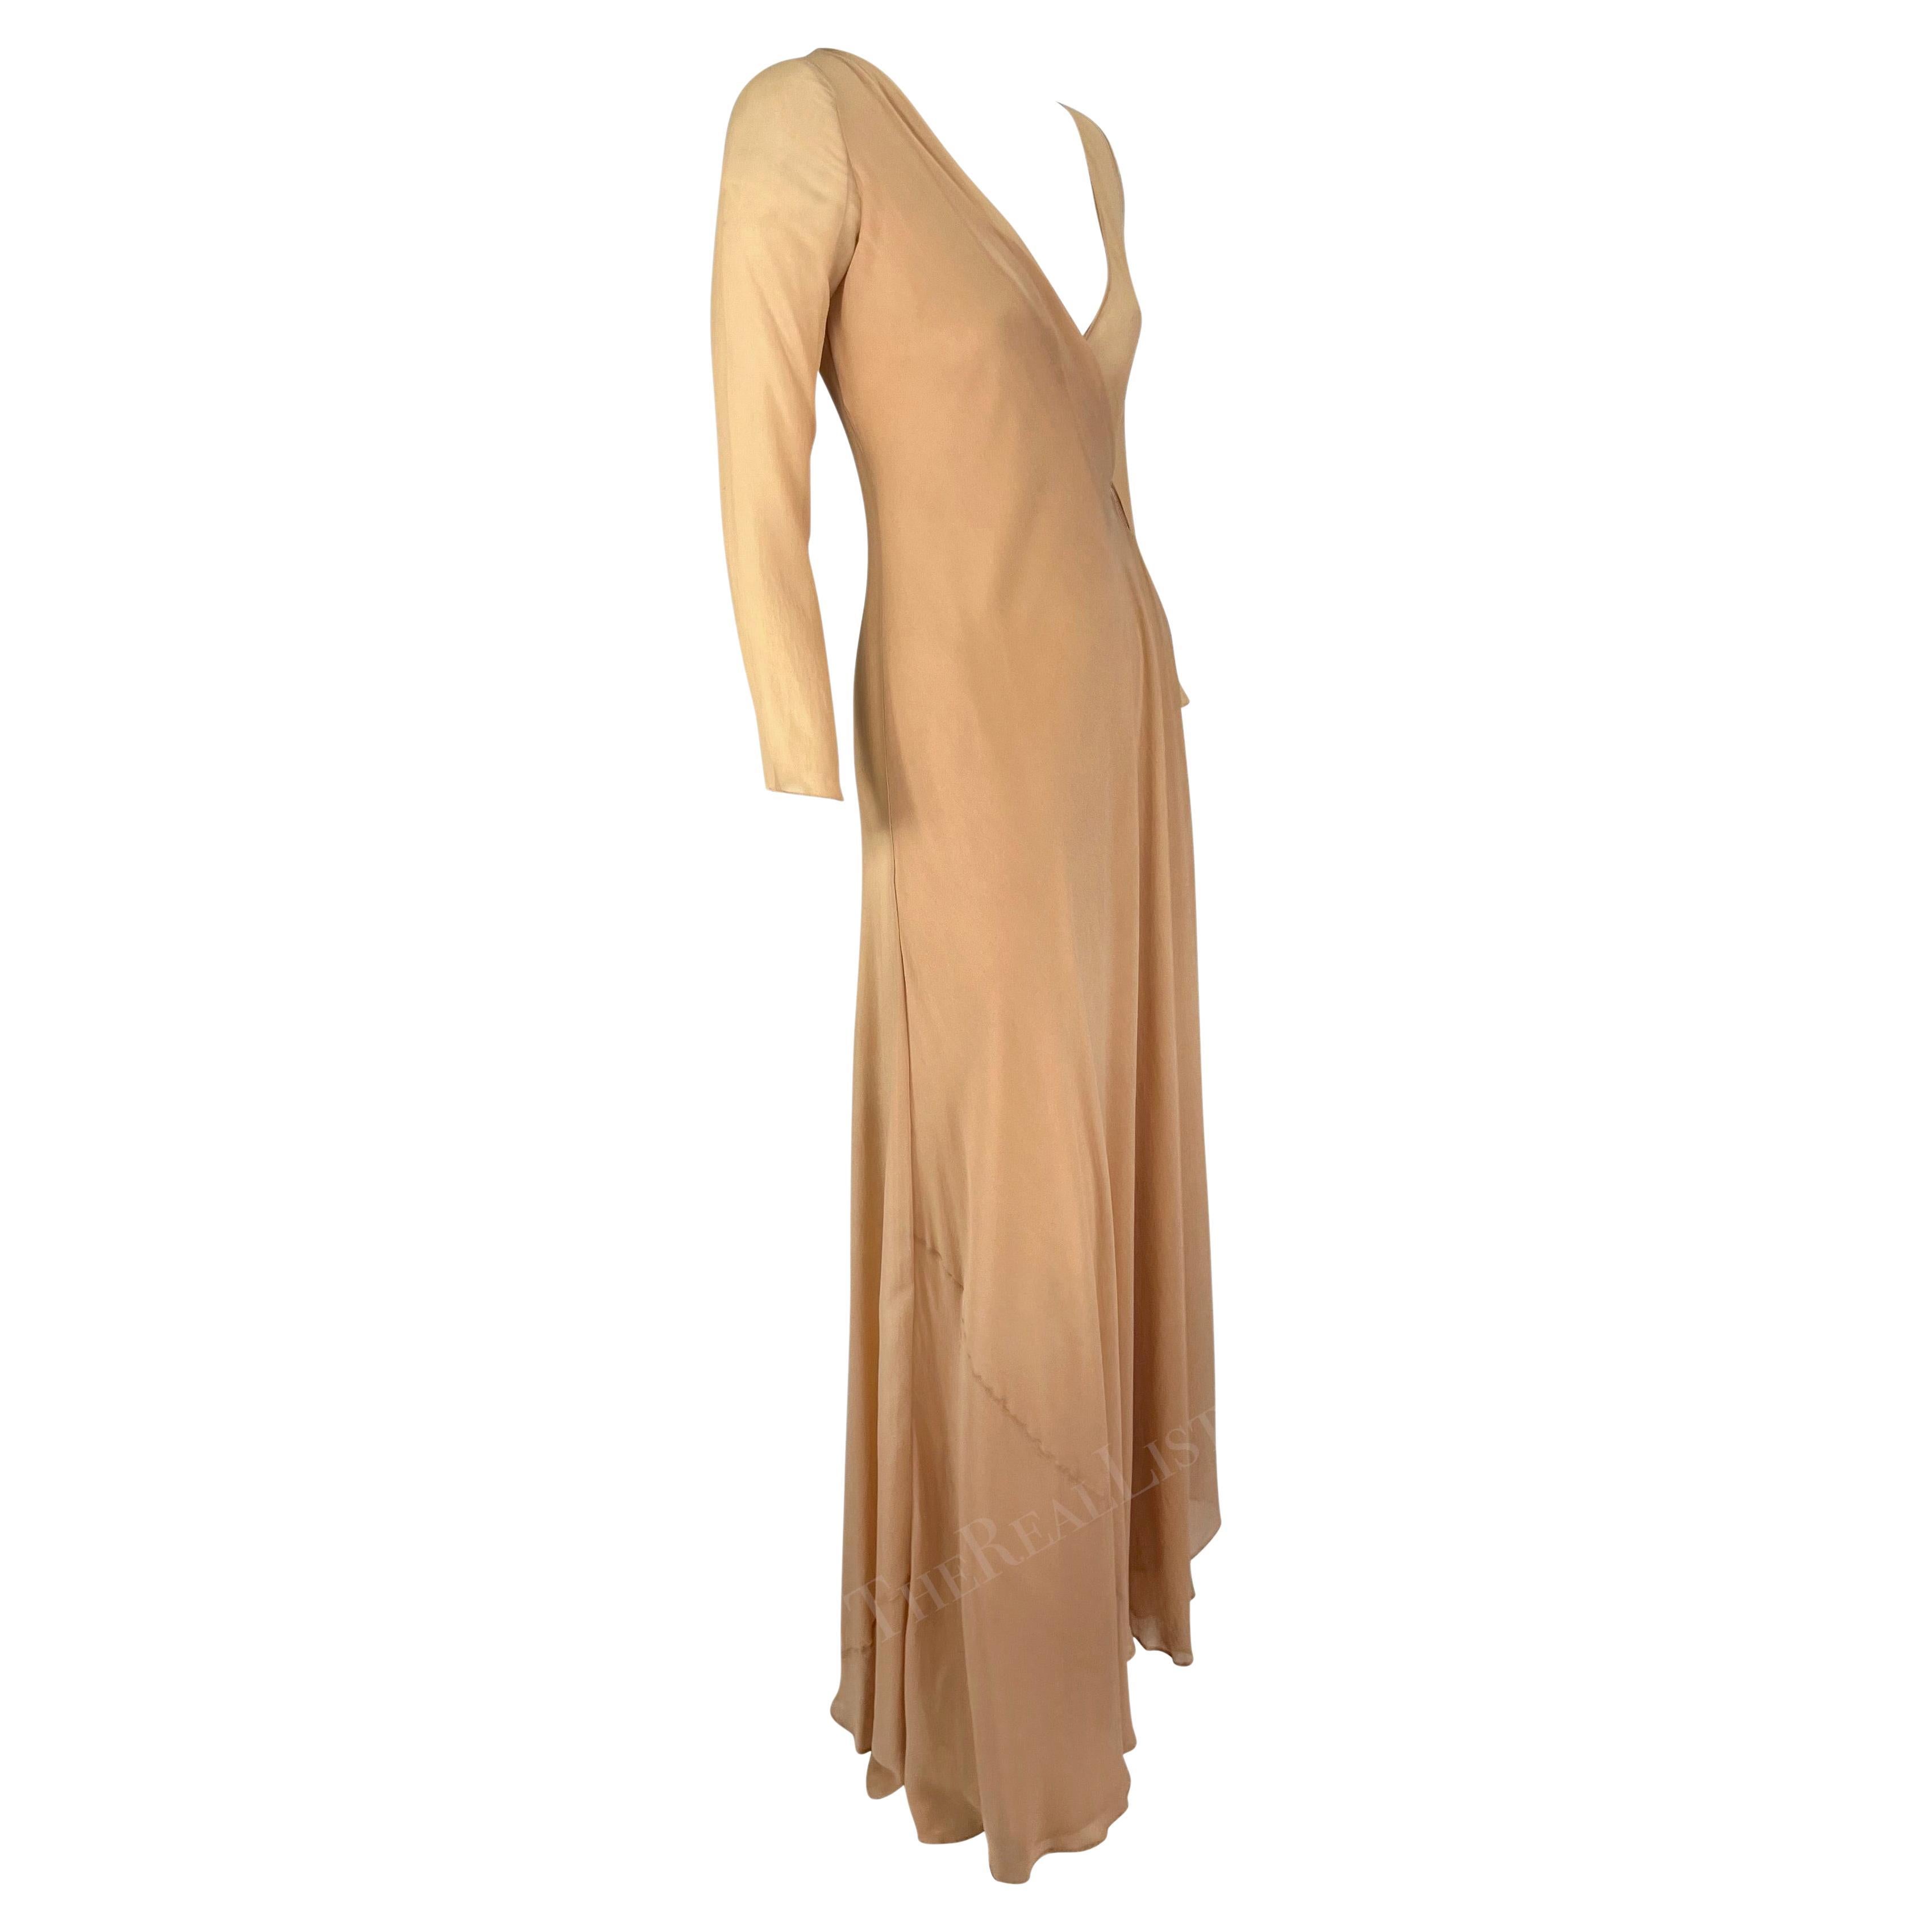 S/S 1998 Gucci by Tom Ford Beige Sheer Wrap Floor Length Sample Gown  For Sale 2